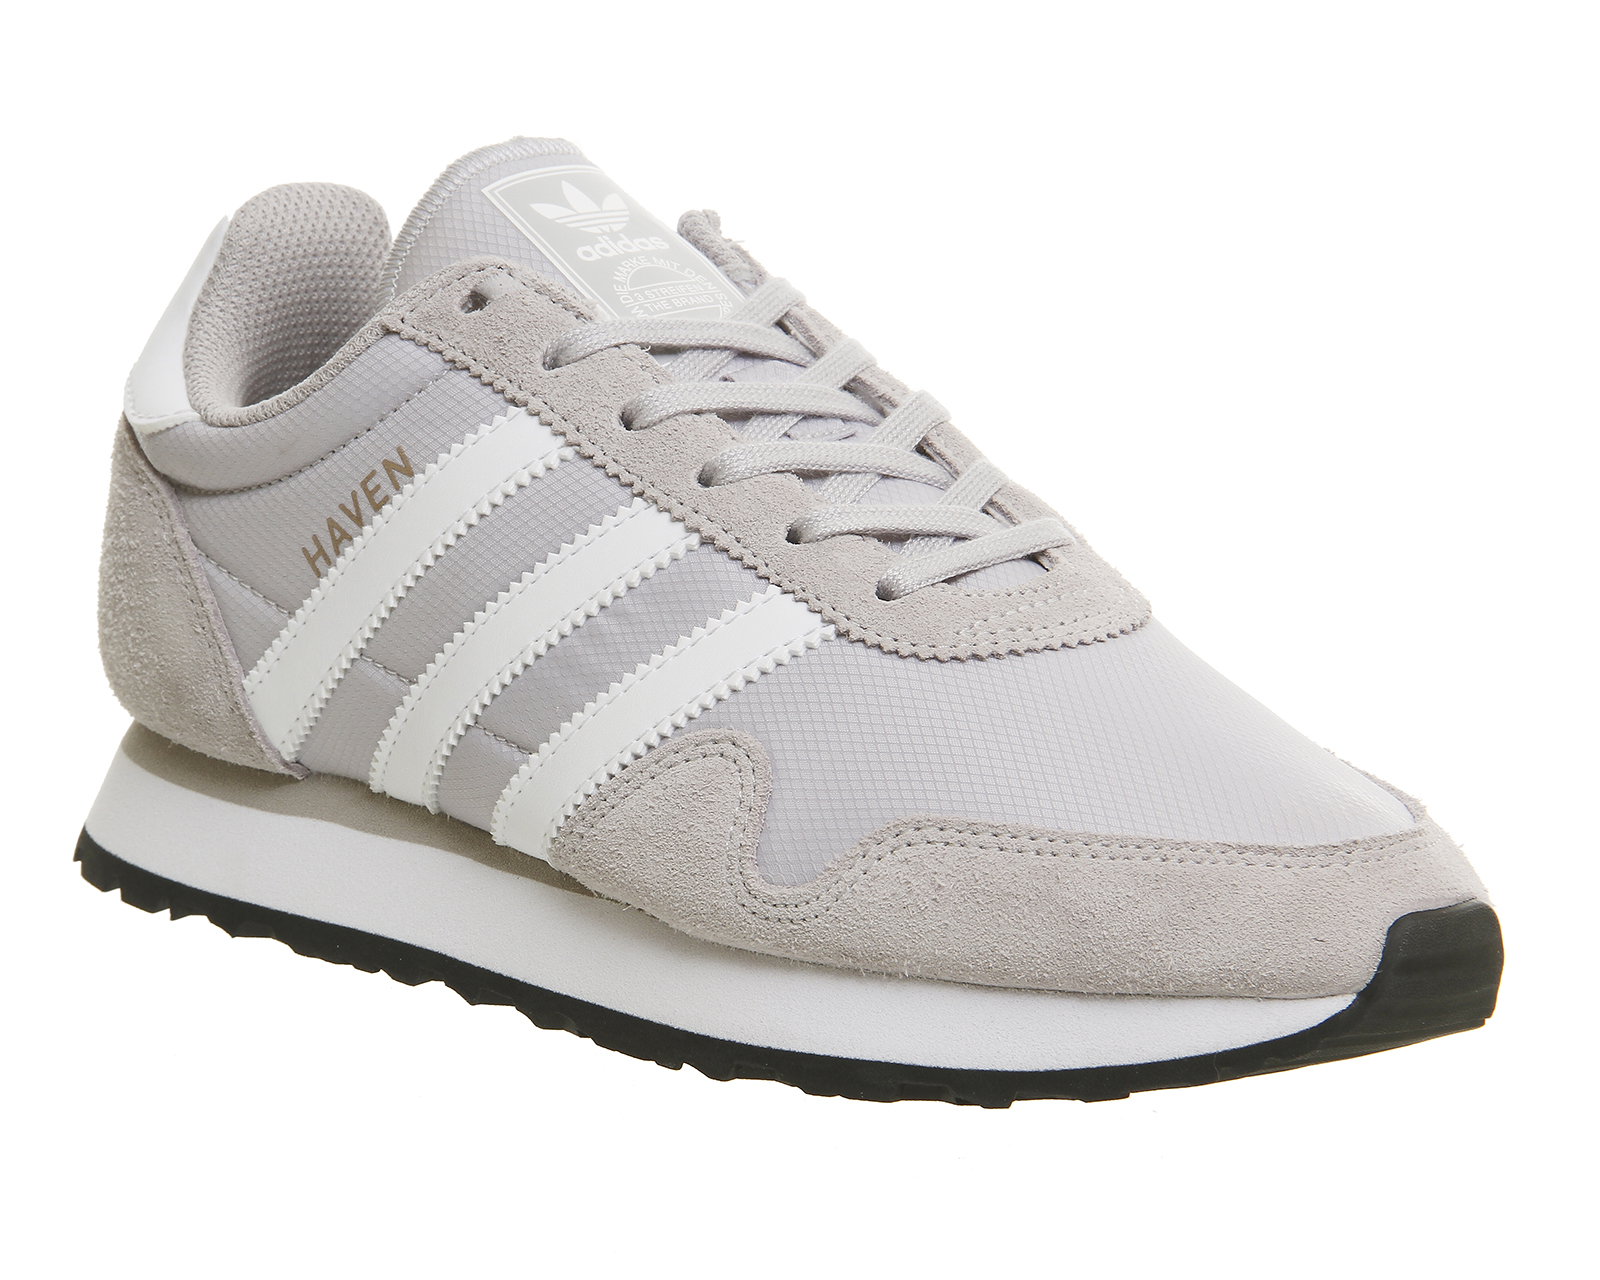 adidas Haven Lgh Solid Grey White - Hers trainers